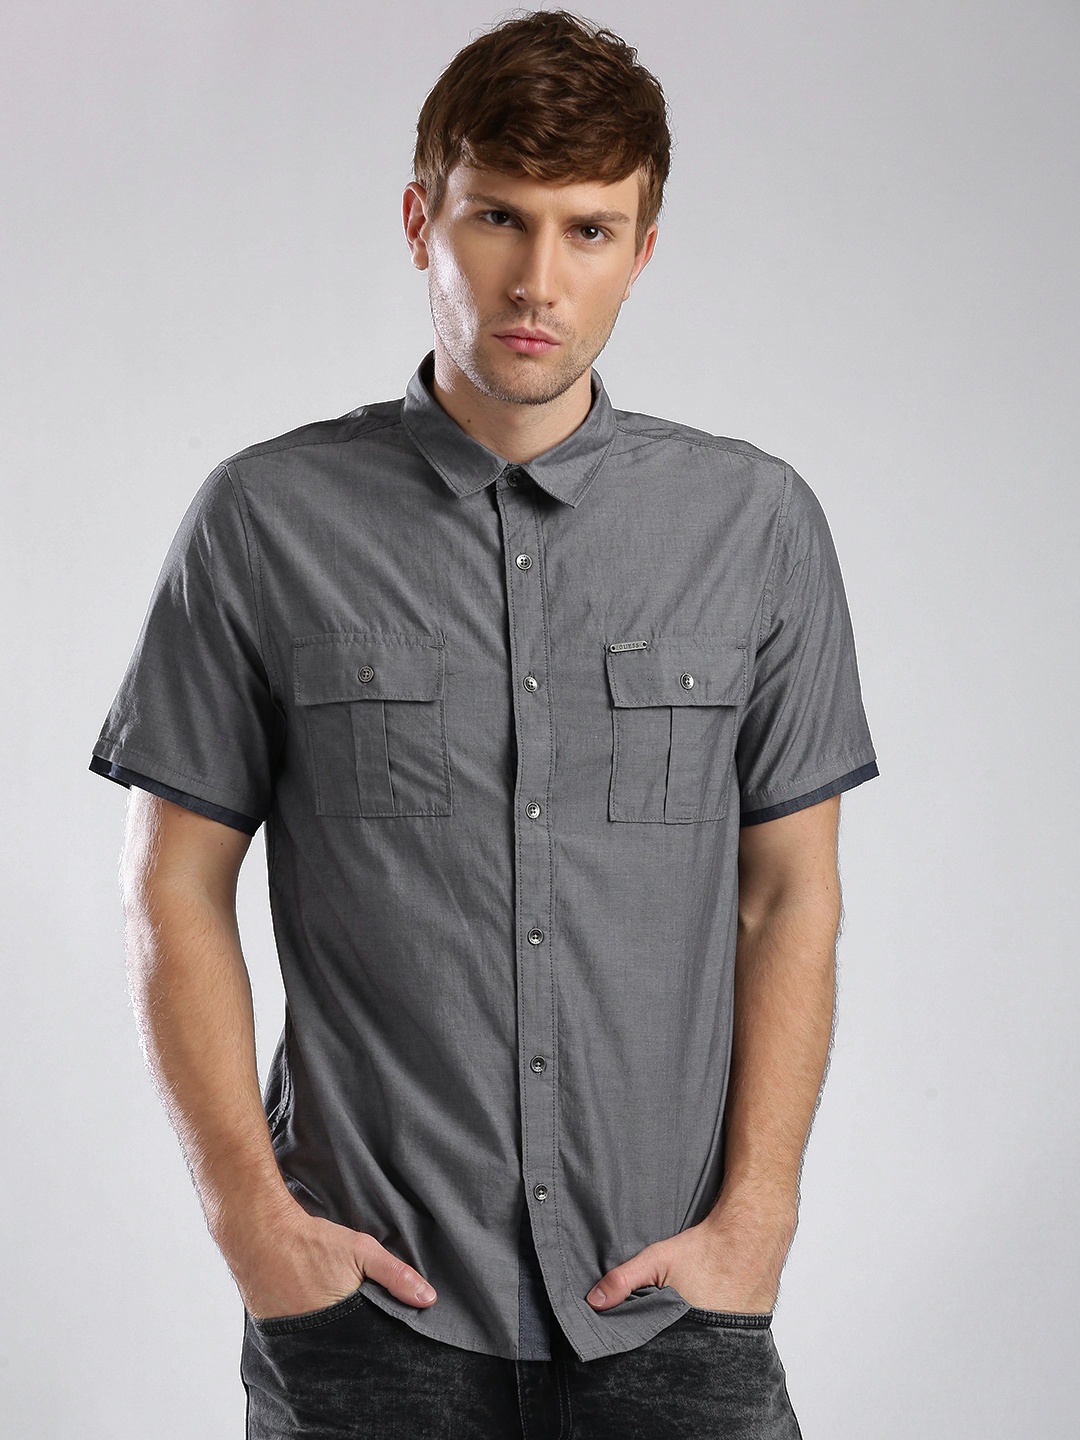 GUESS Men Grey Slim Fit Solid Casual Shirt price Myntra. Shirts Deals ...